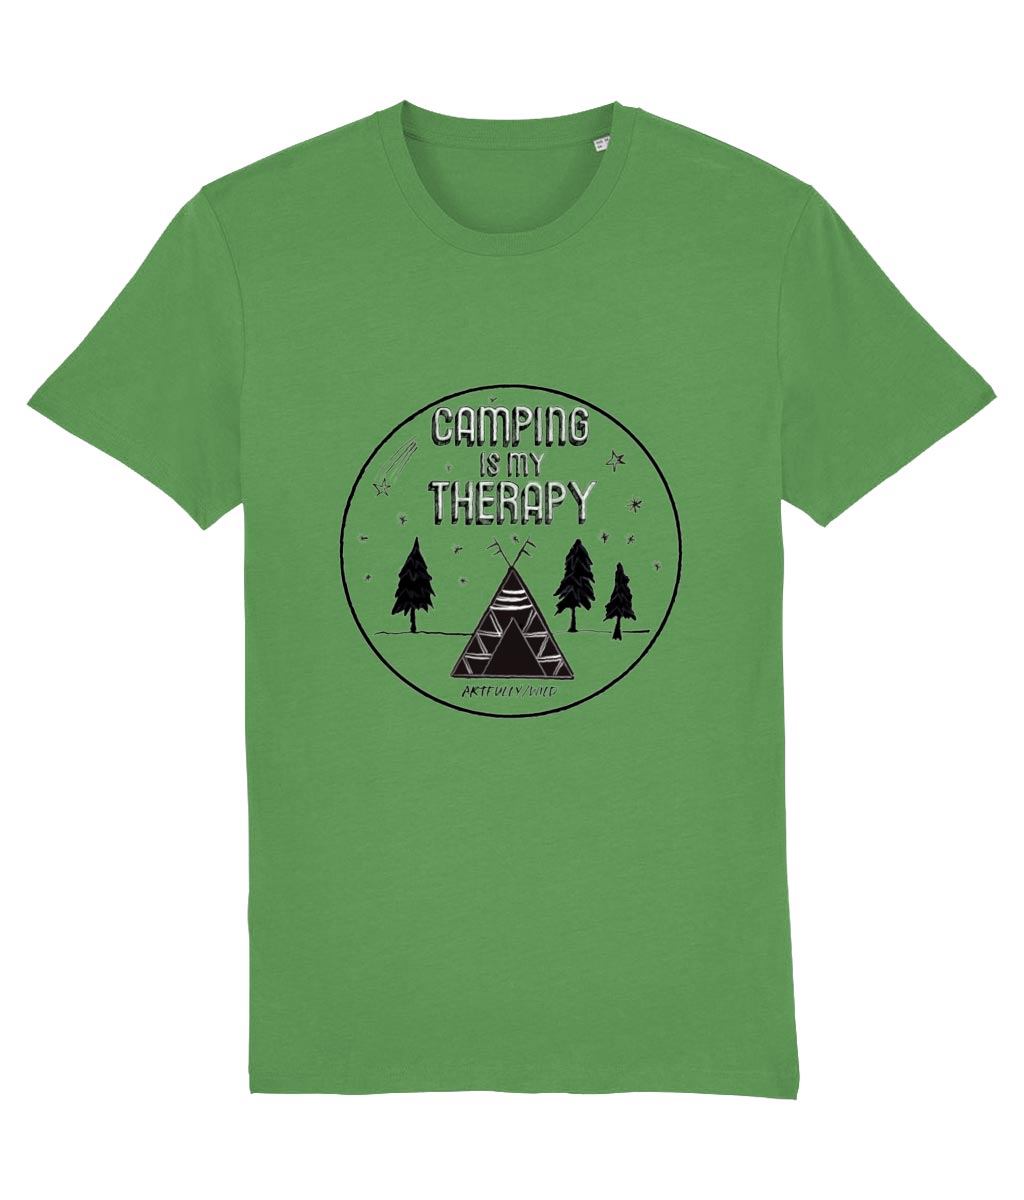 'CAMPING IS MY THERAPY' Organic Unisex Green T-Shirt. Printed with eco-friendly water-based Inks. Original Design by Artfully Wild.